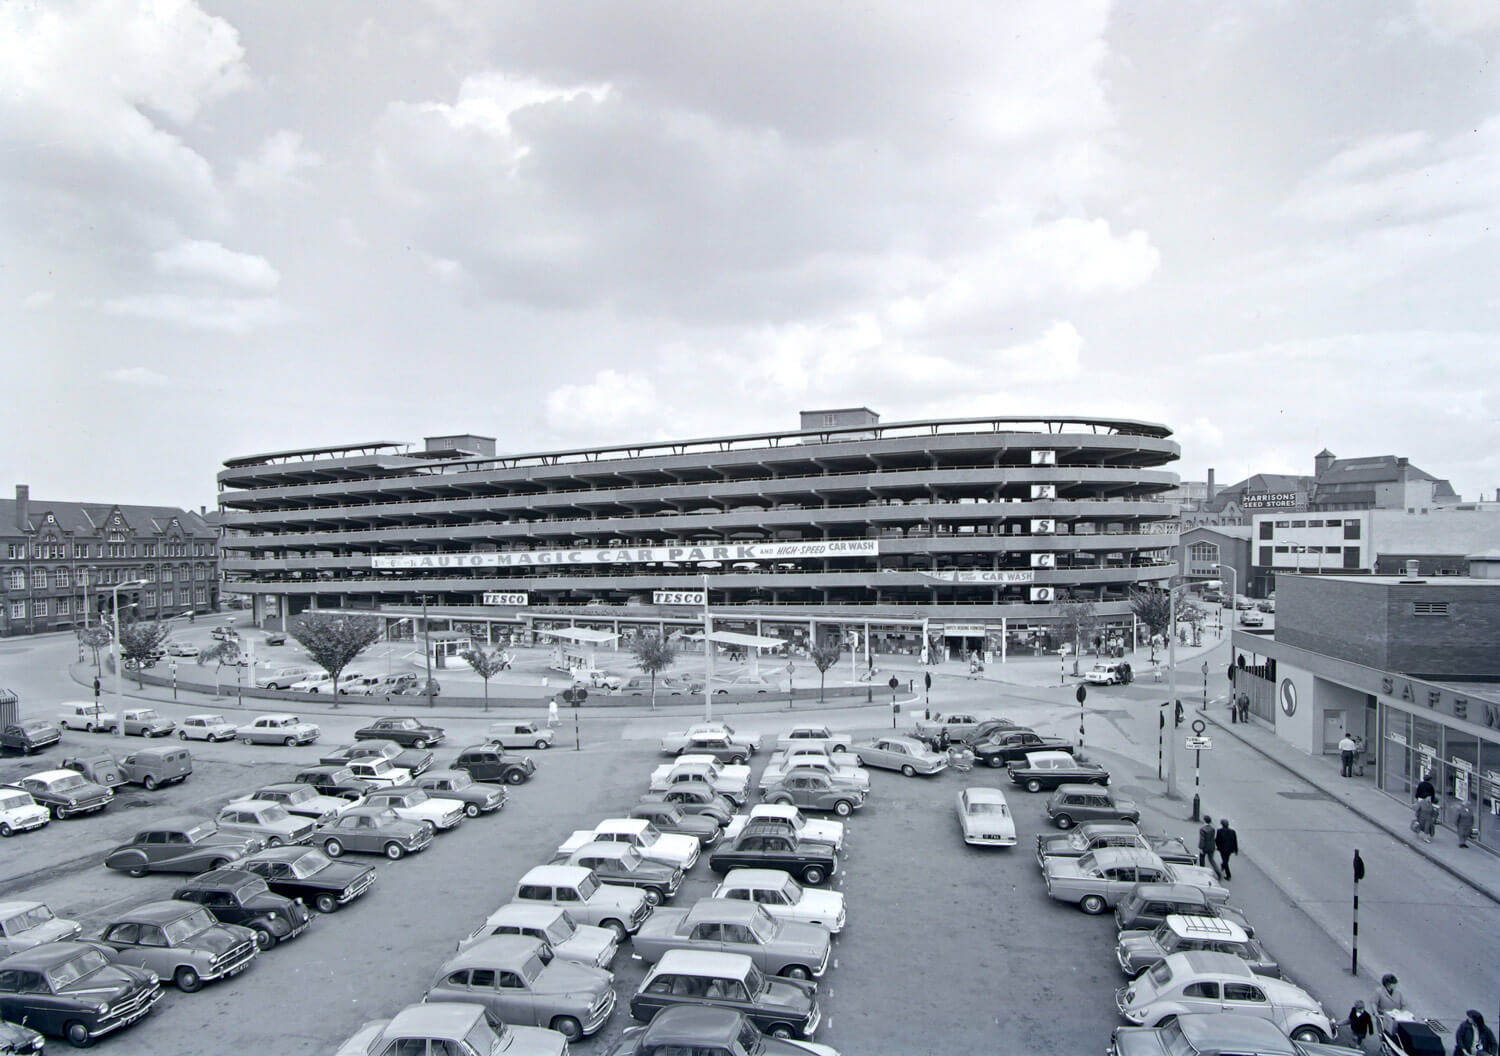 Auto-Magic Car park in its heyday, 1960s - Leicestershire Record Office